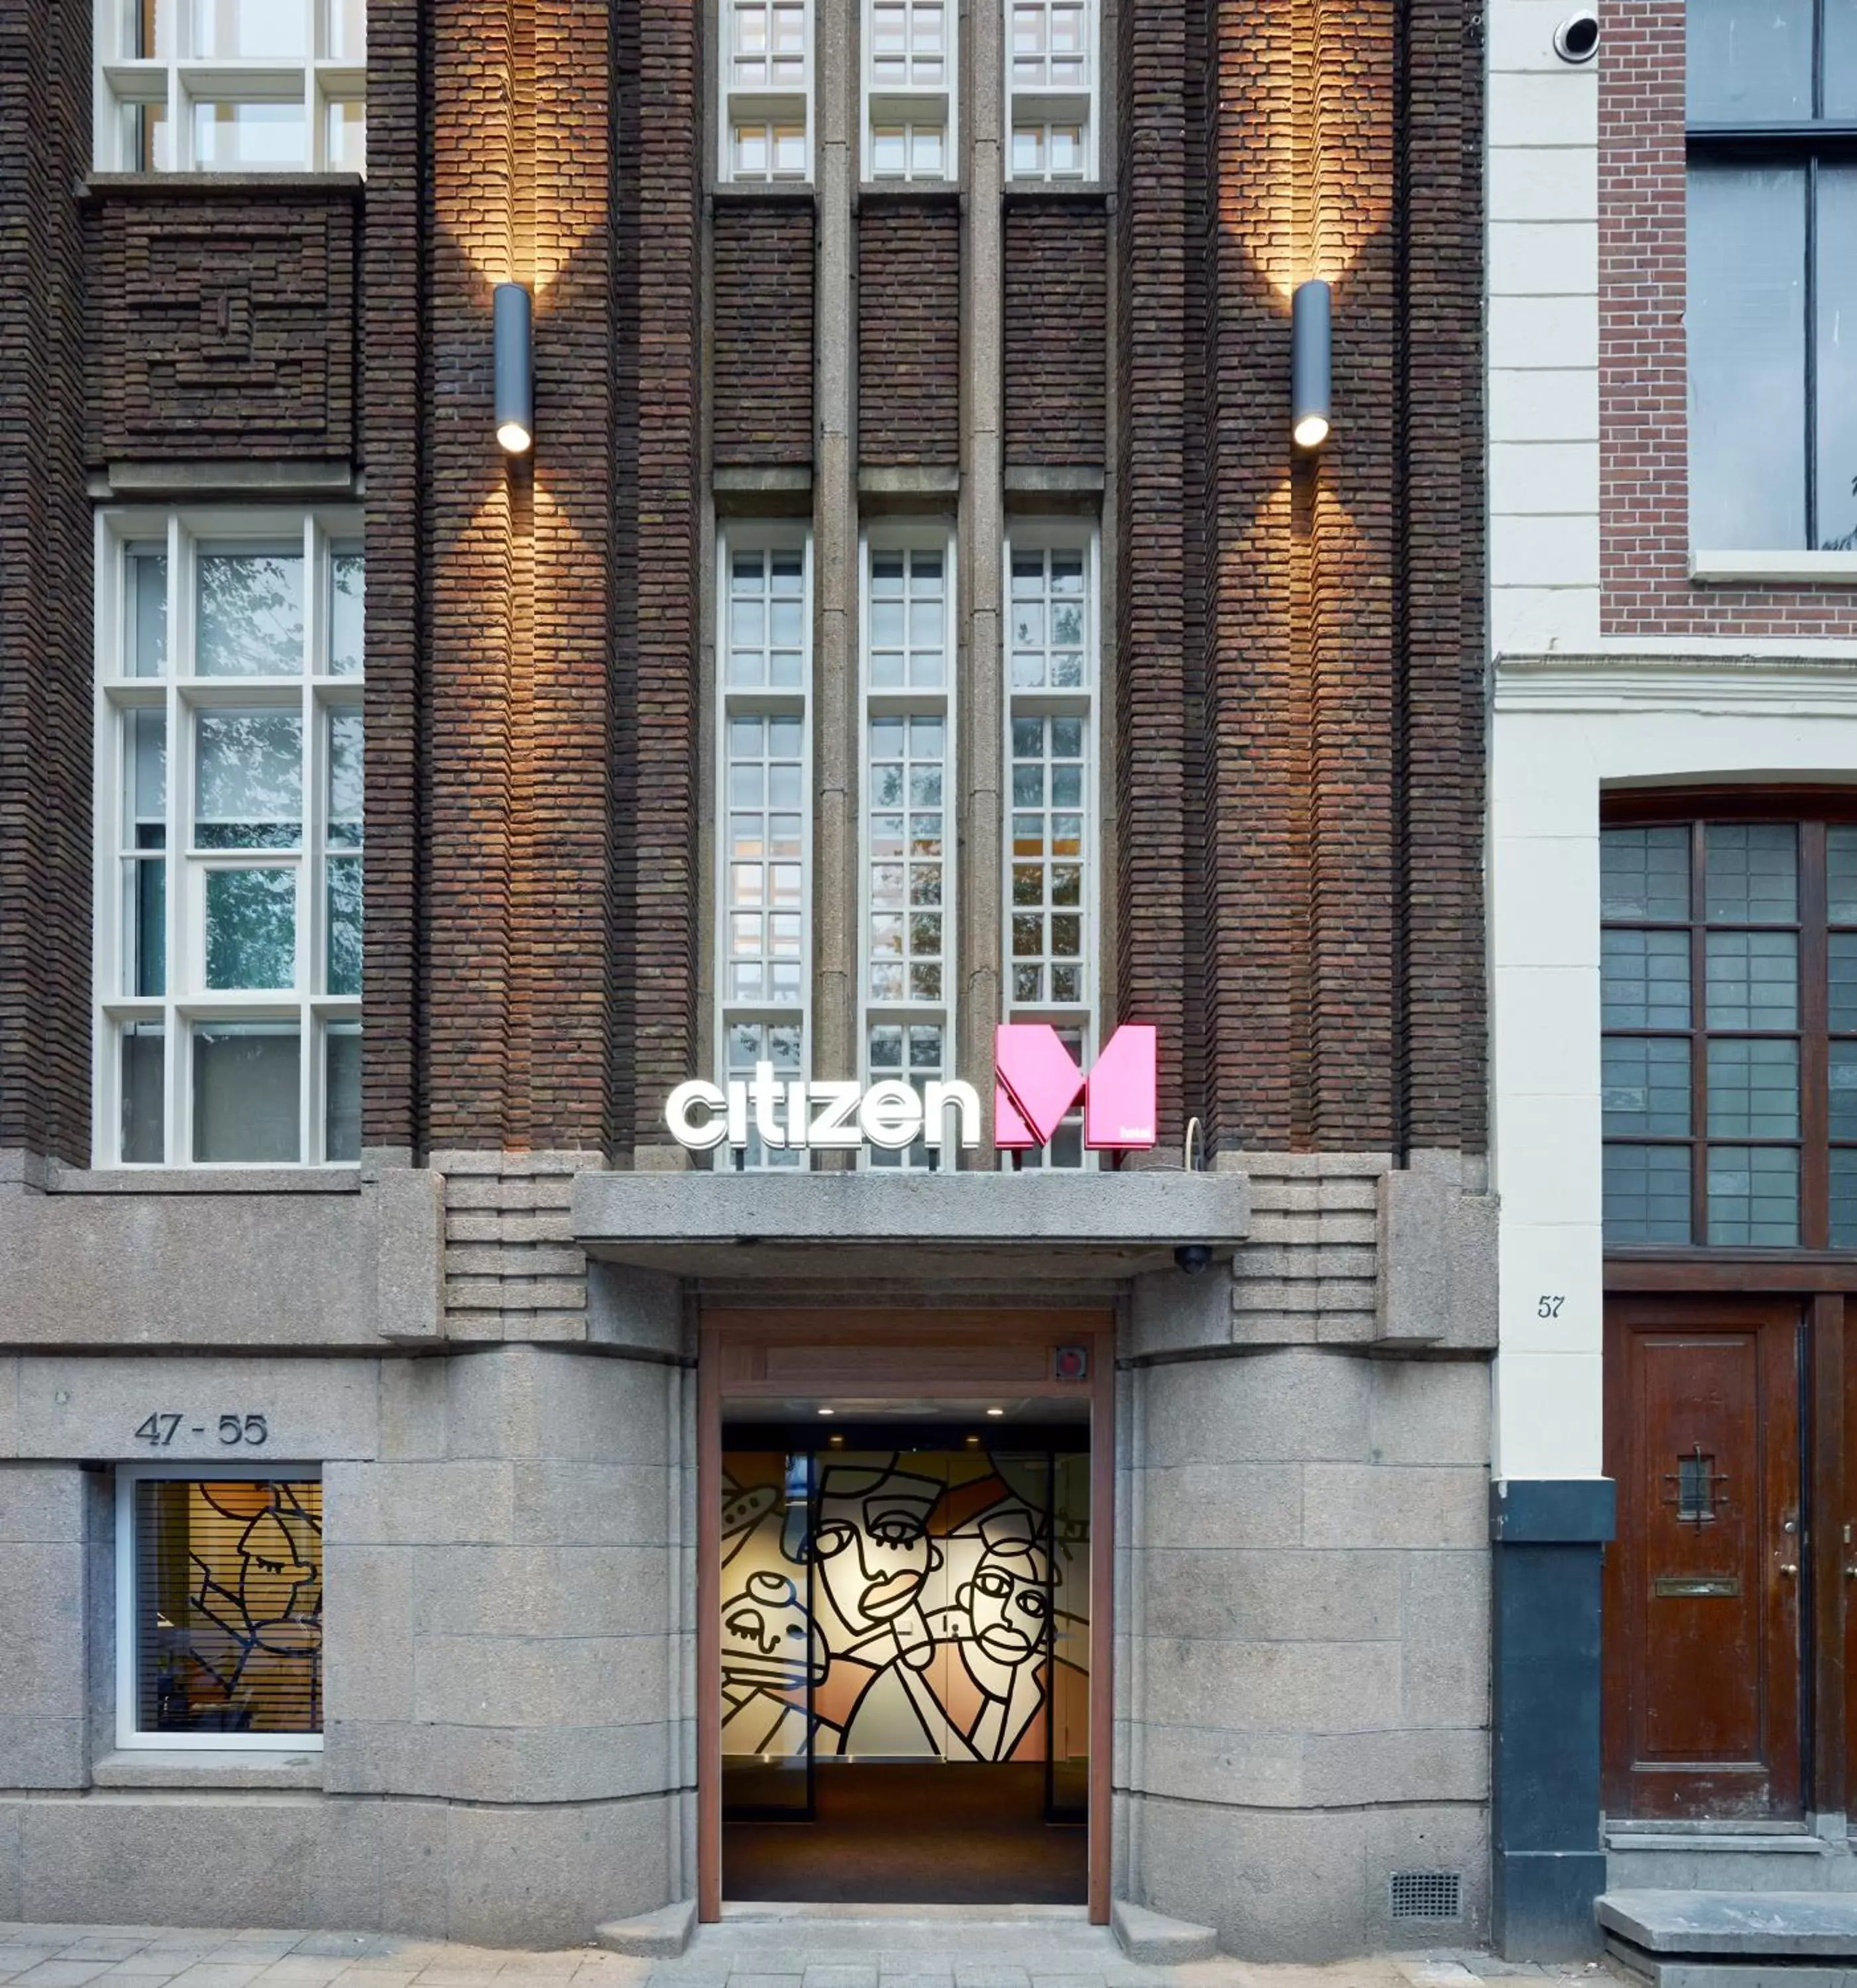 Property building in citizenM Amstel Amsterdam